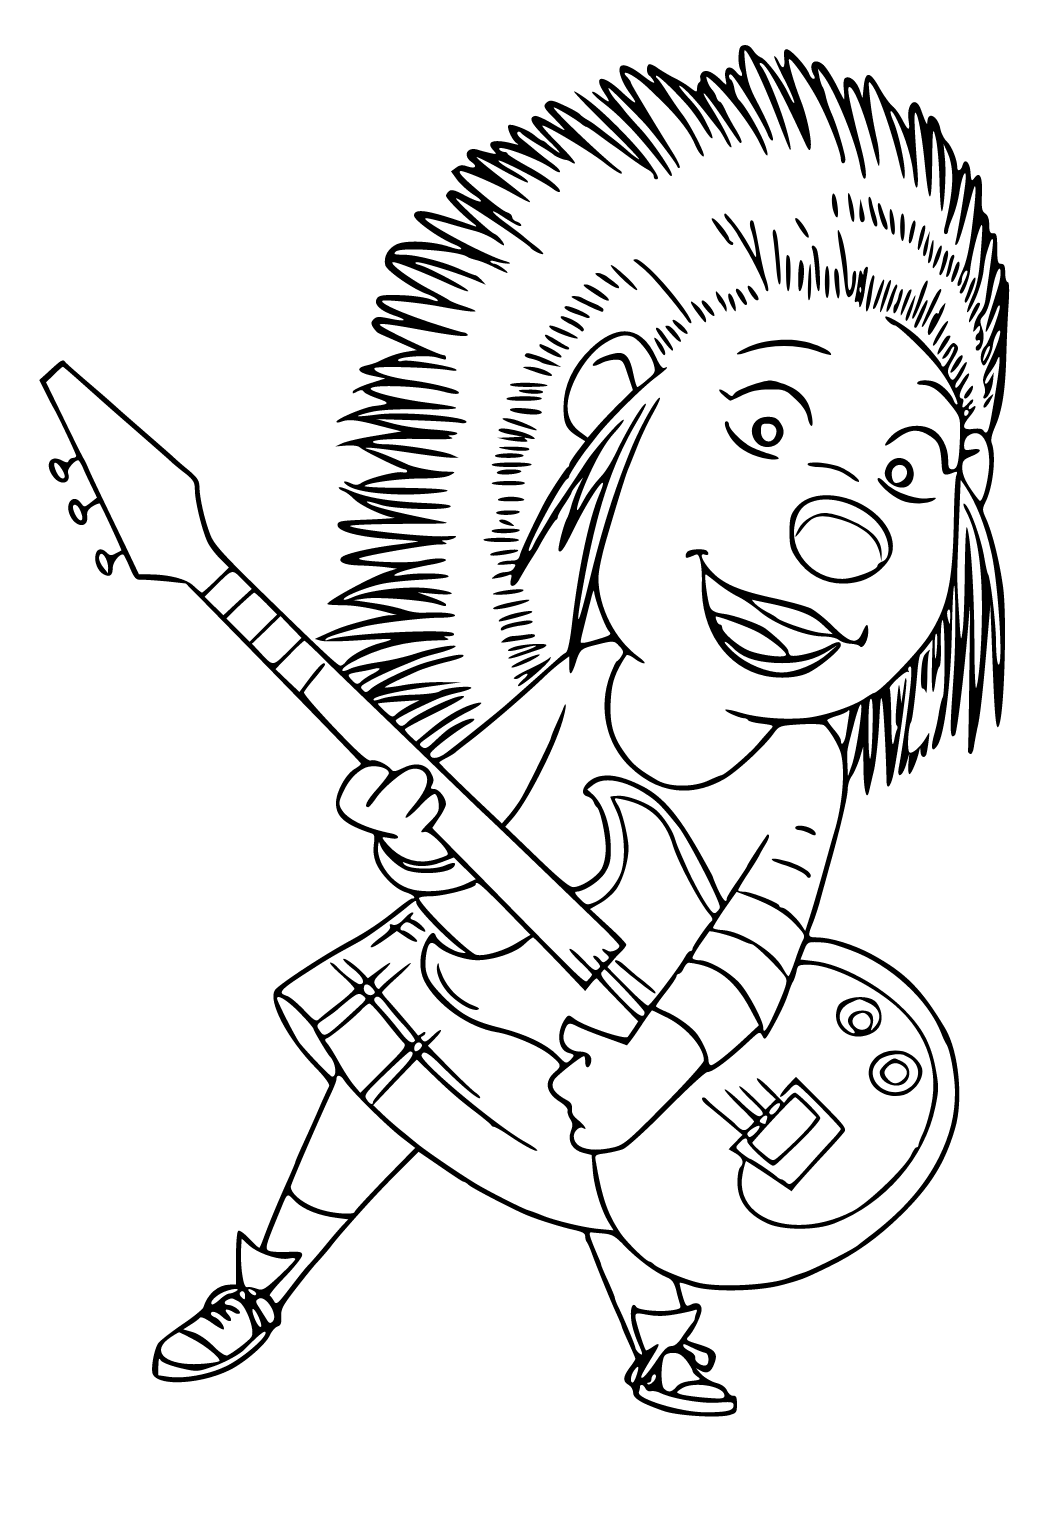 Free printable sing porcupine coloring page for adults and kids